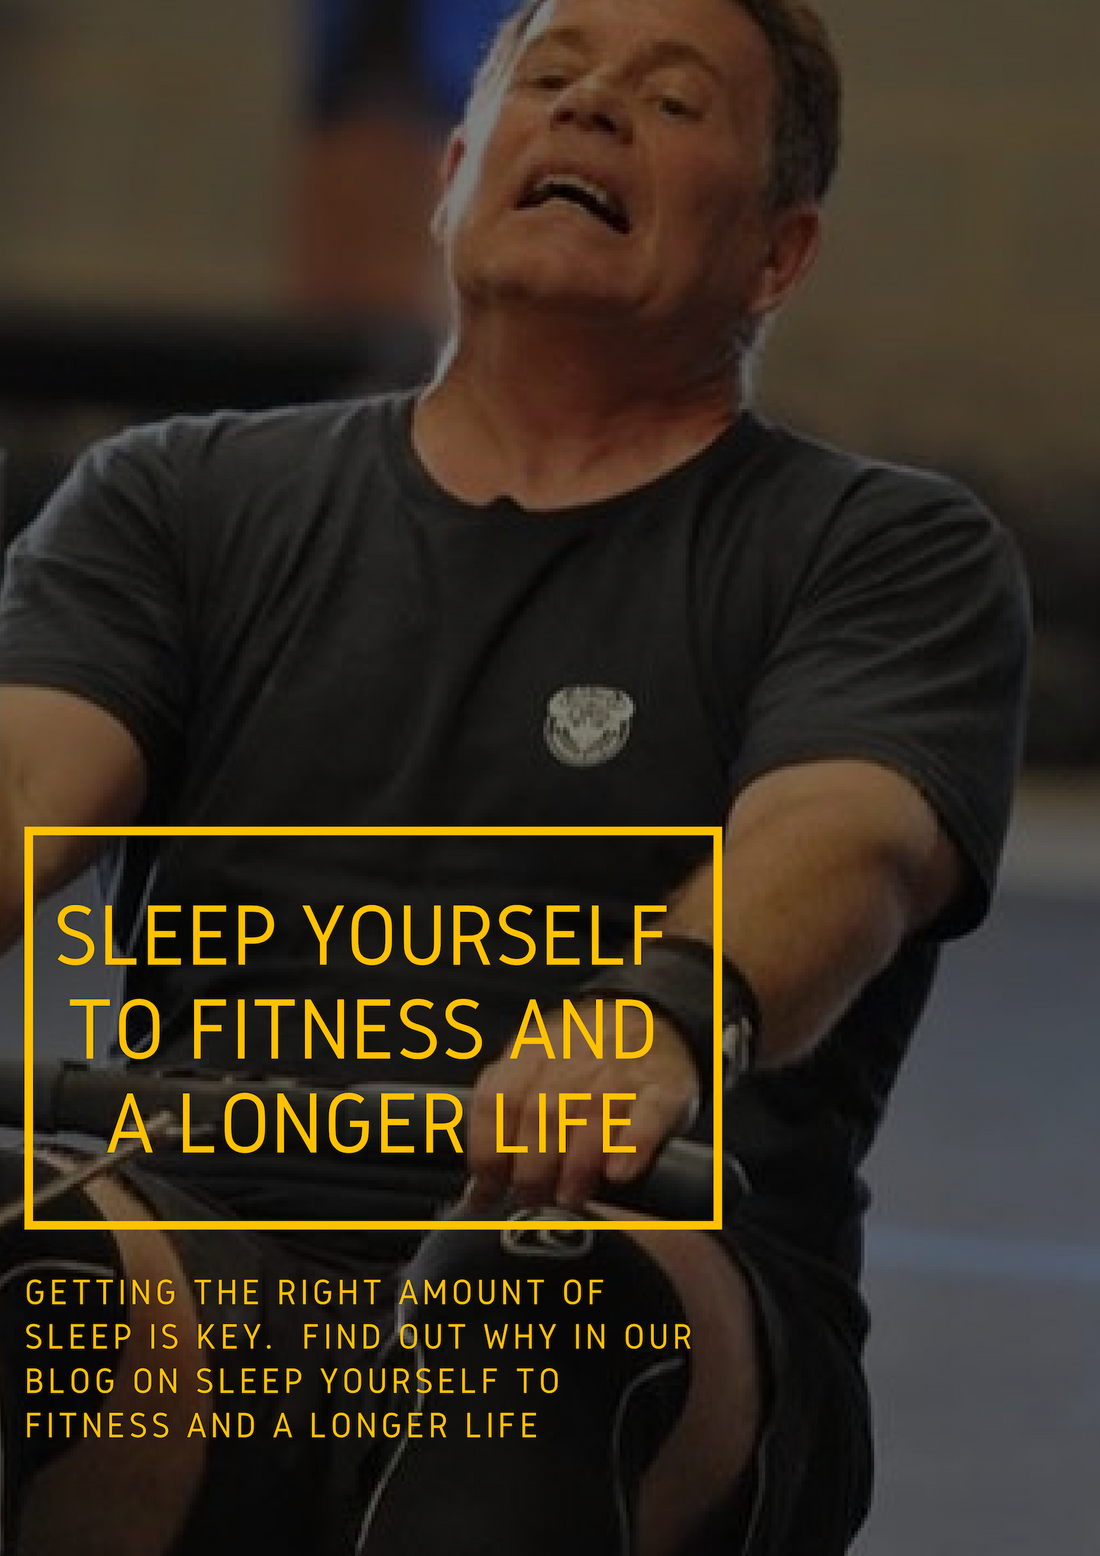 Sleep Yourself to Fitness and a Longer Life